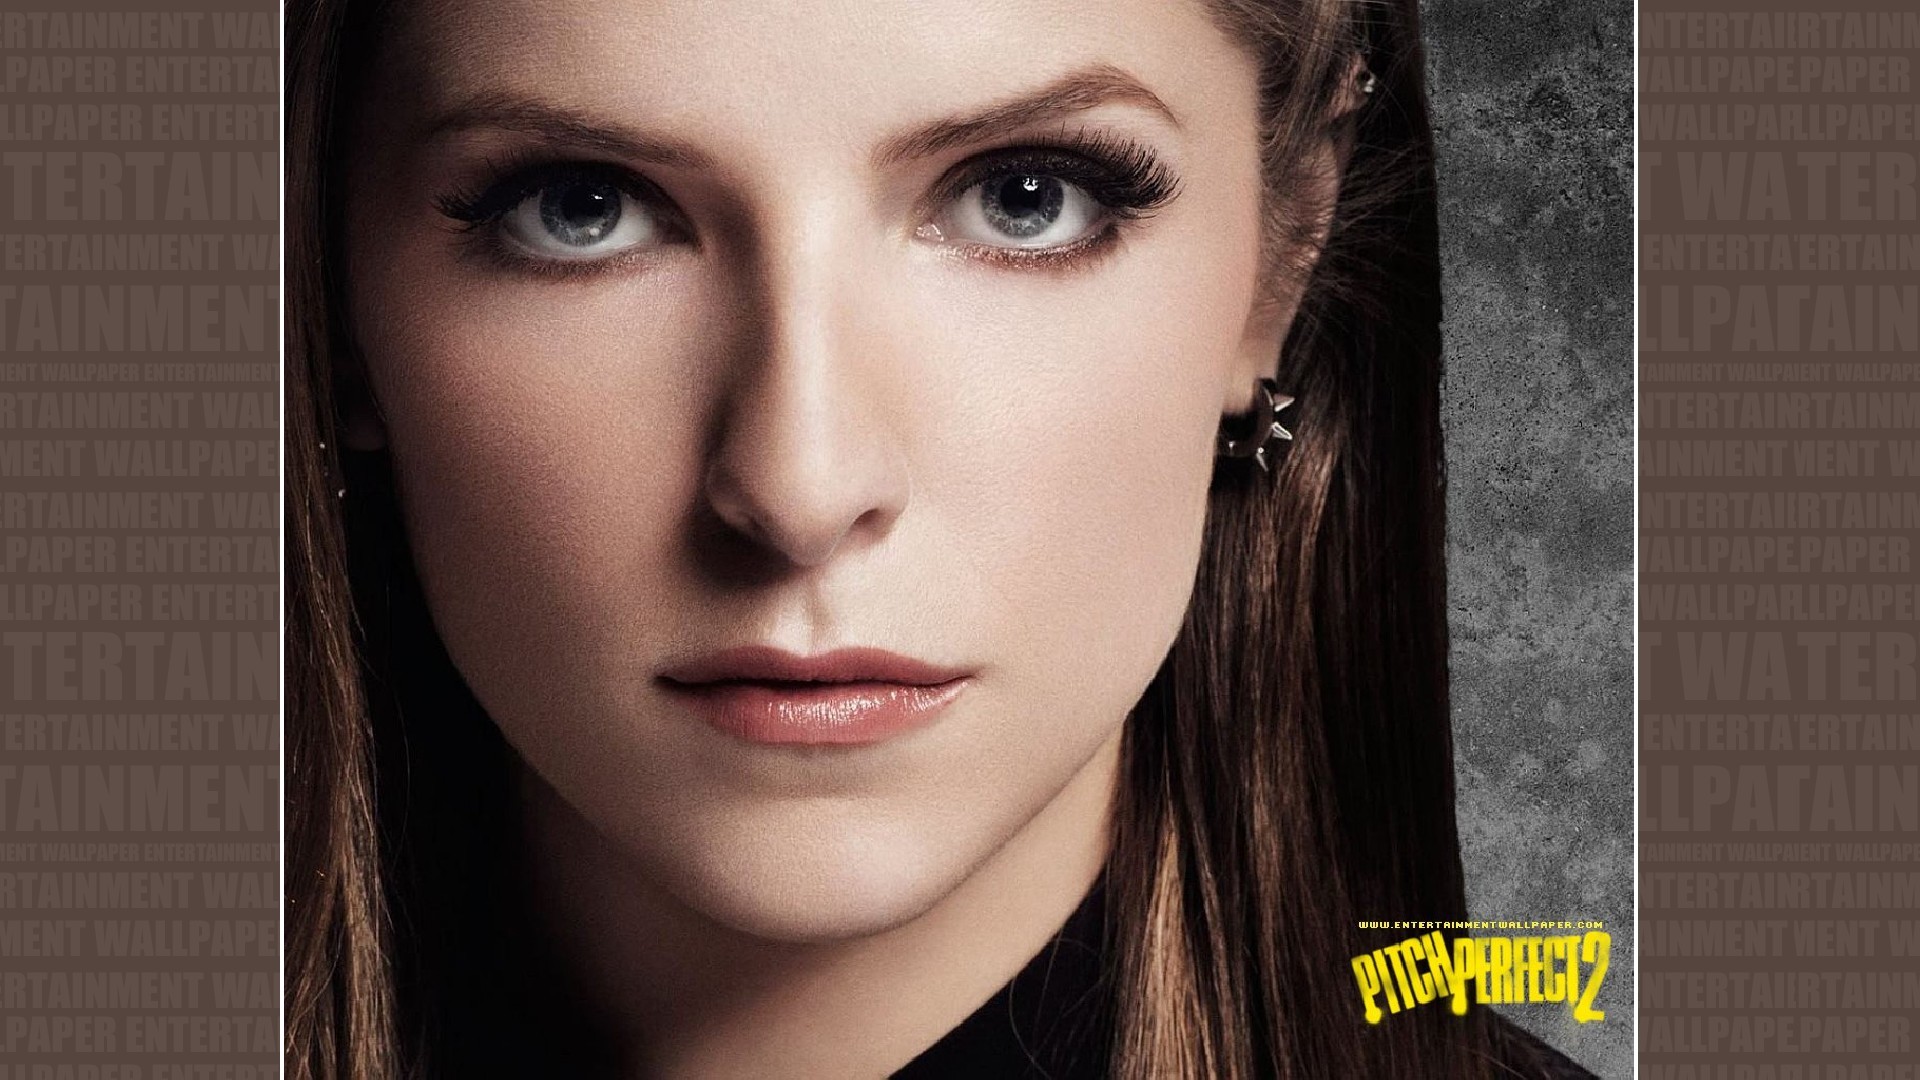 1920x1080 Pitch Perfect 2 Wallpaper - Original size, download now.